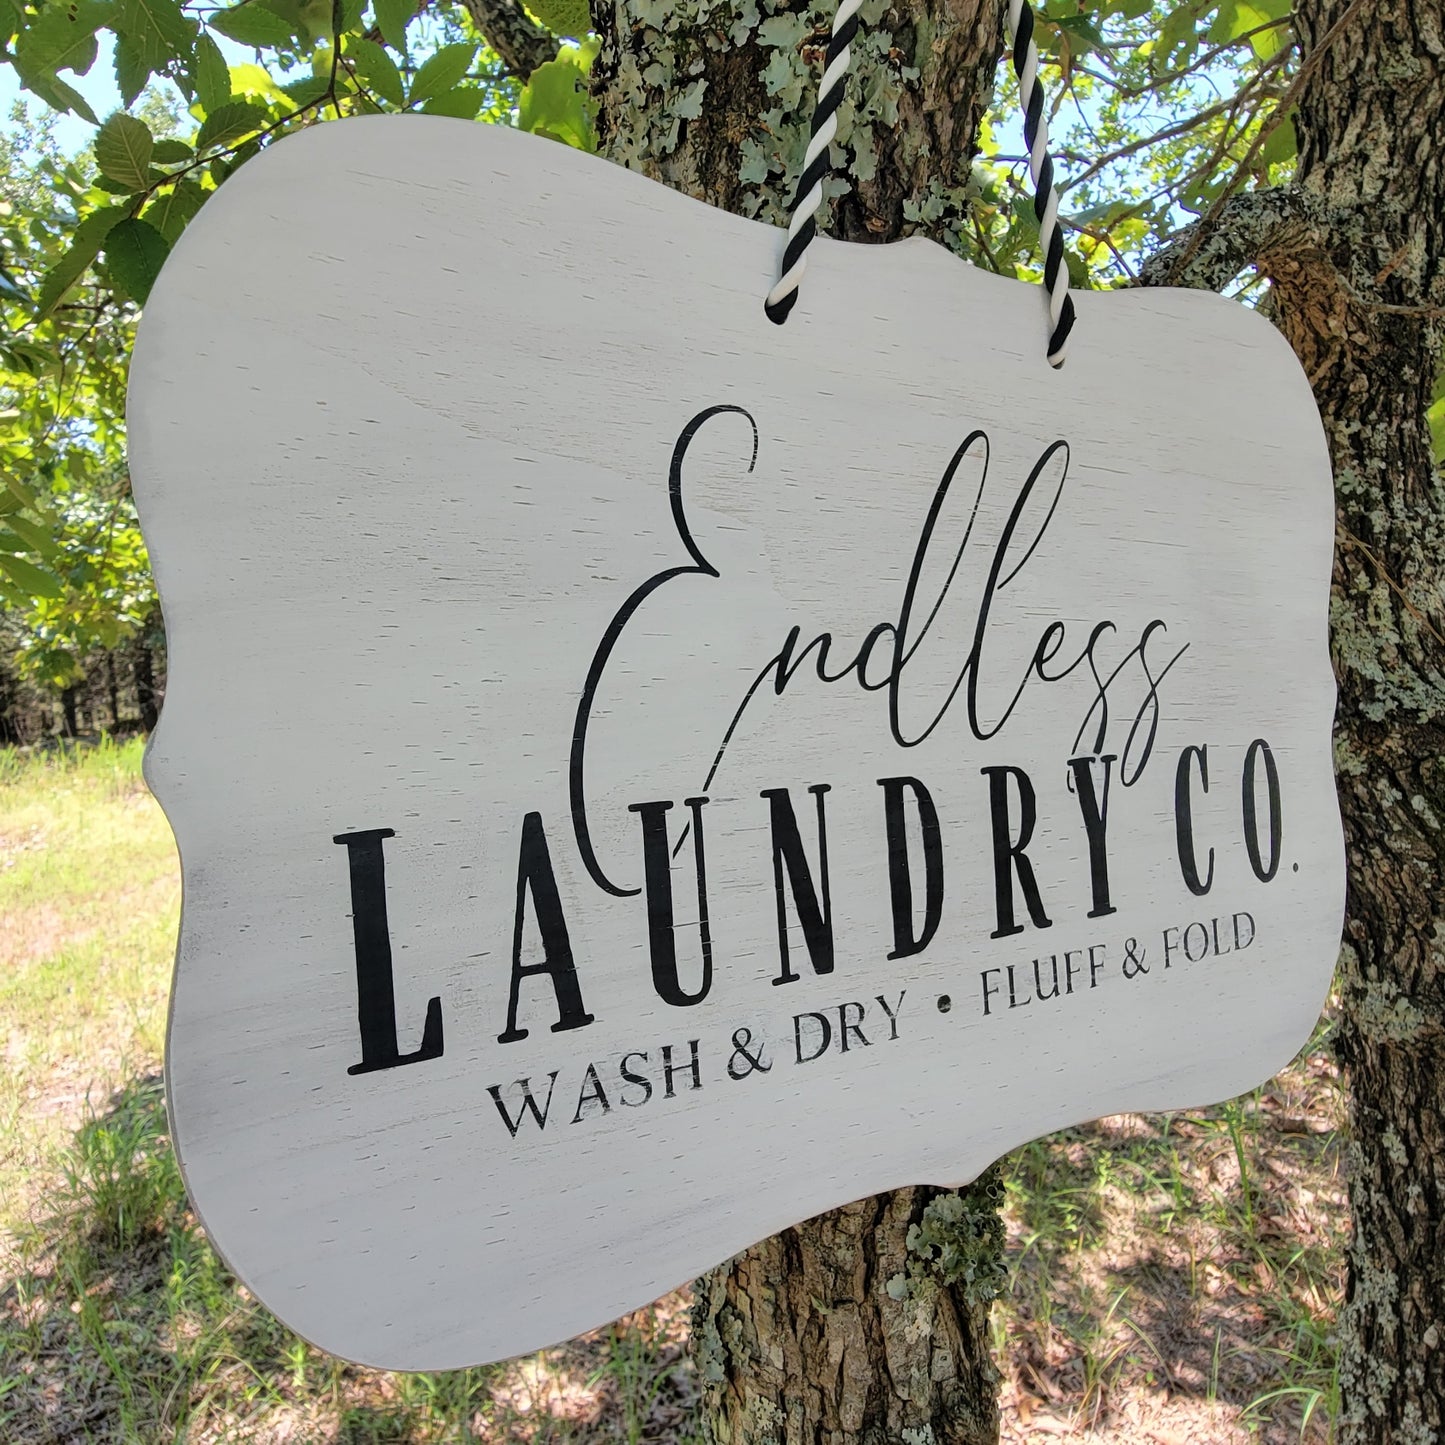 Endless Laundry Co.